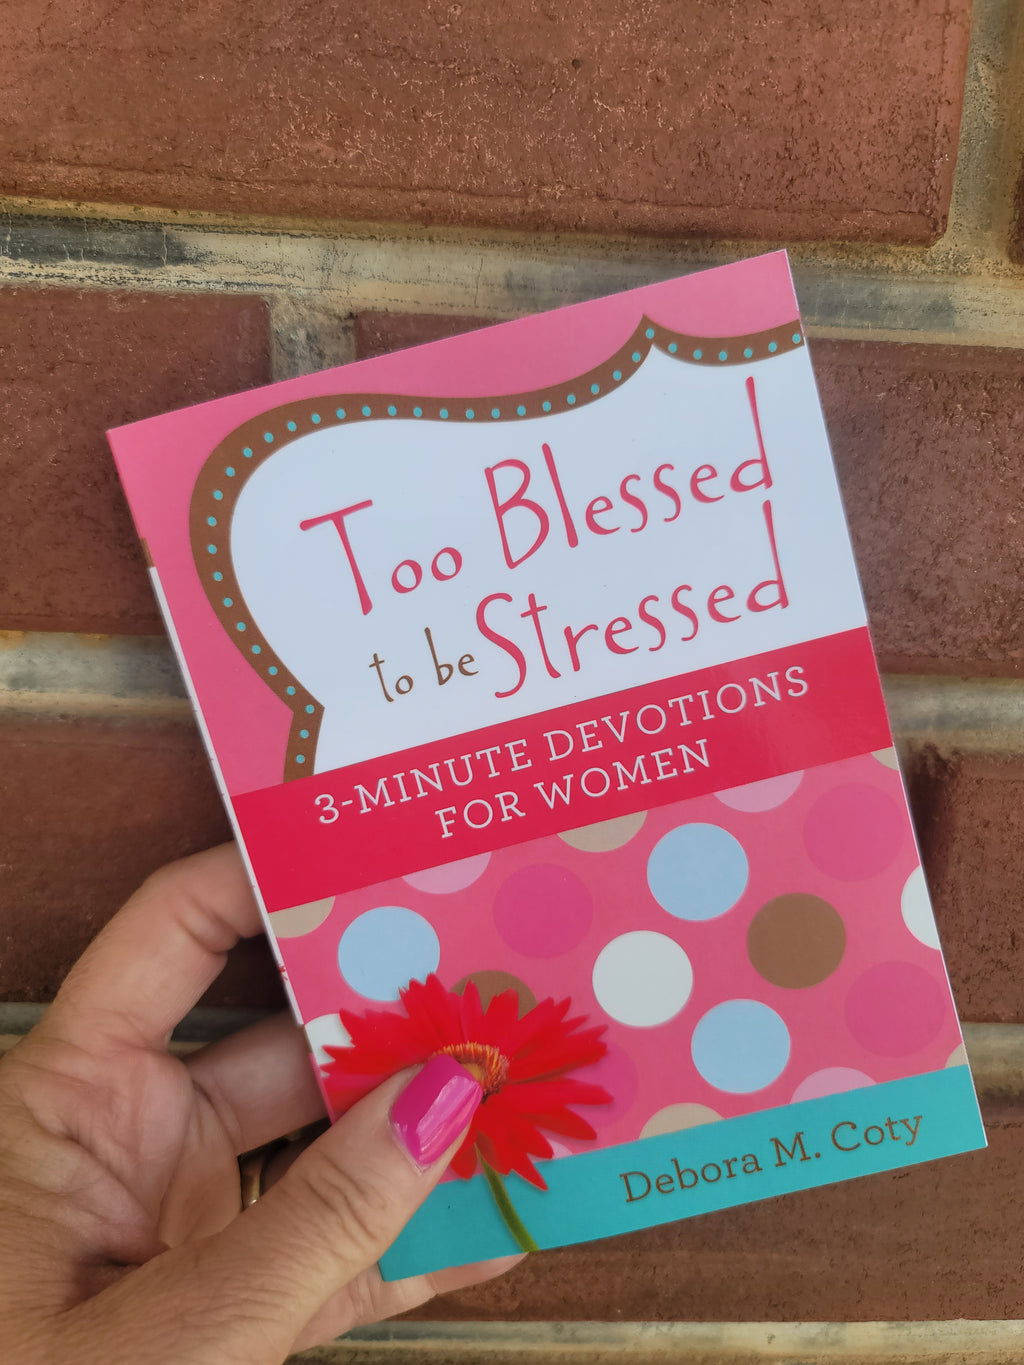 Too Blessed to be Stressed Devotional